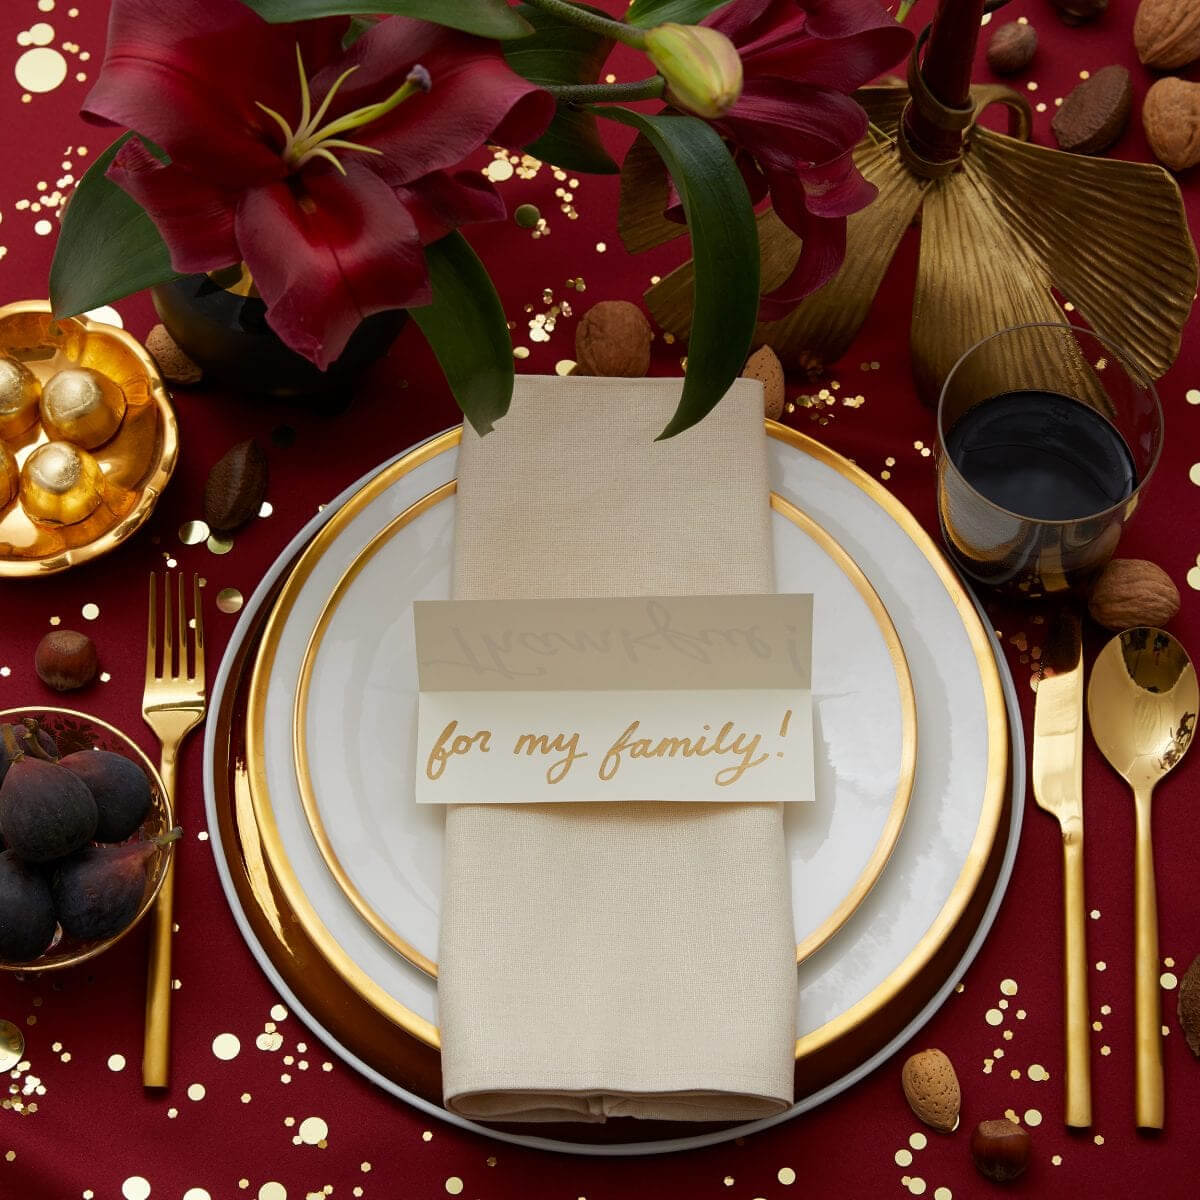 Thankful Table Card | Darcy Miller Designs Regarding Thanksgiving Place Cards Template